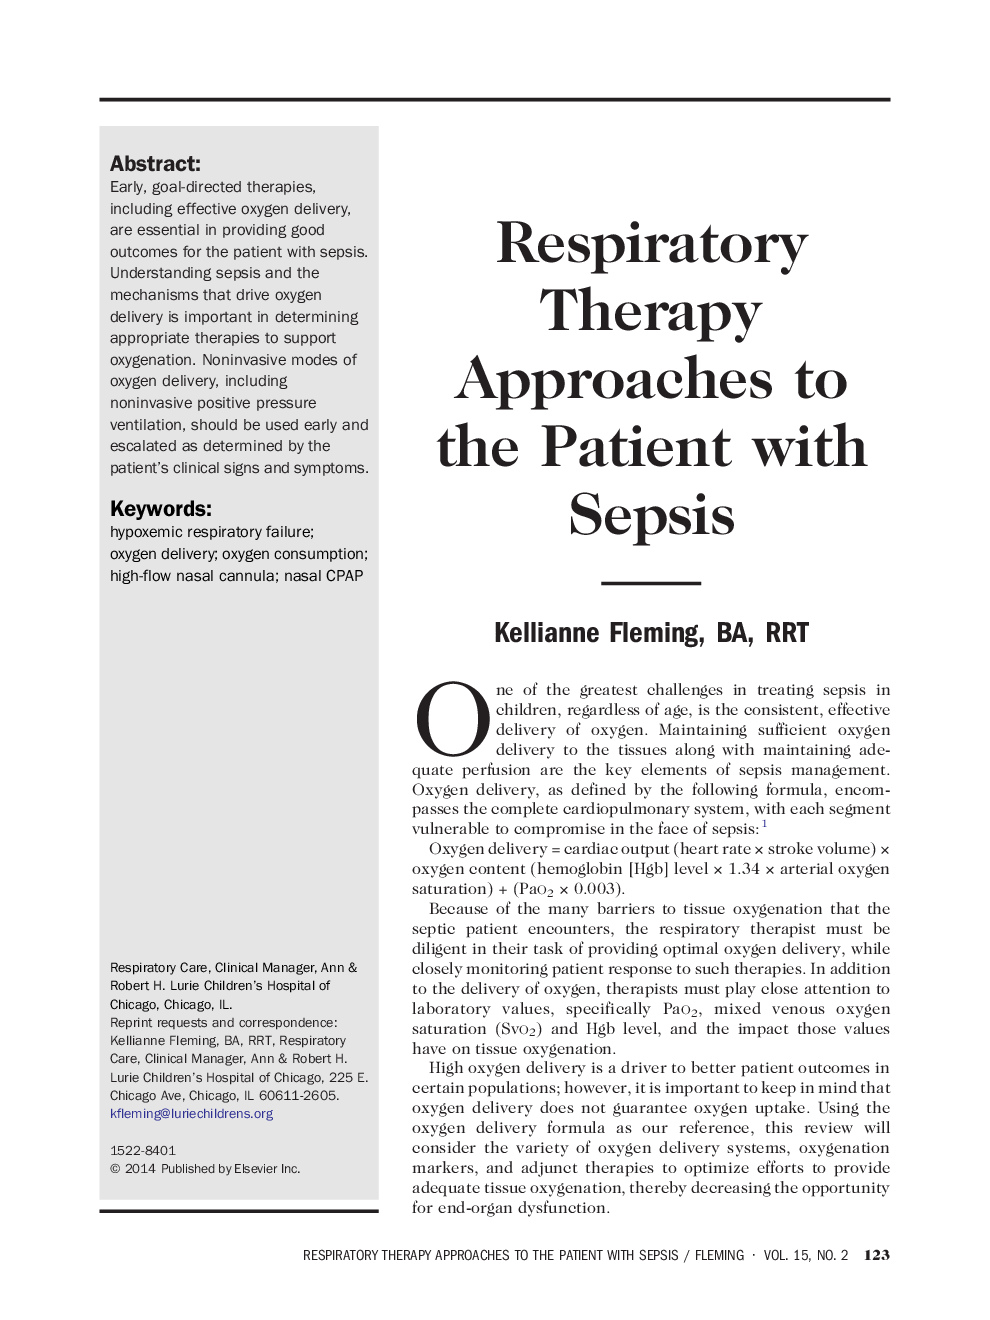 Respiratory Therapy Approaches to the Patient with Sepsis